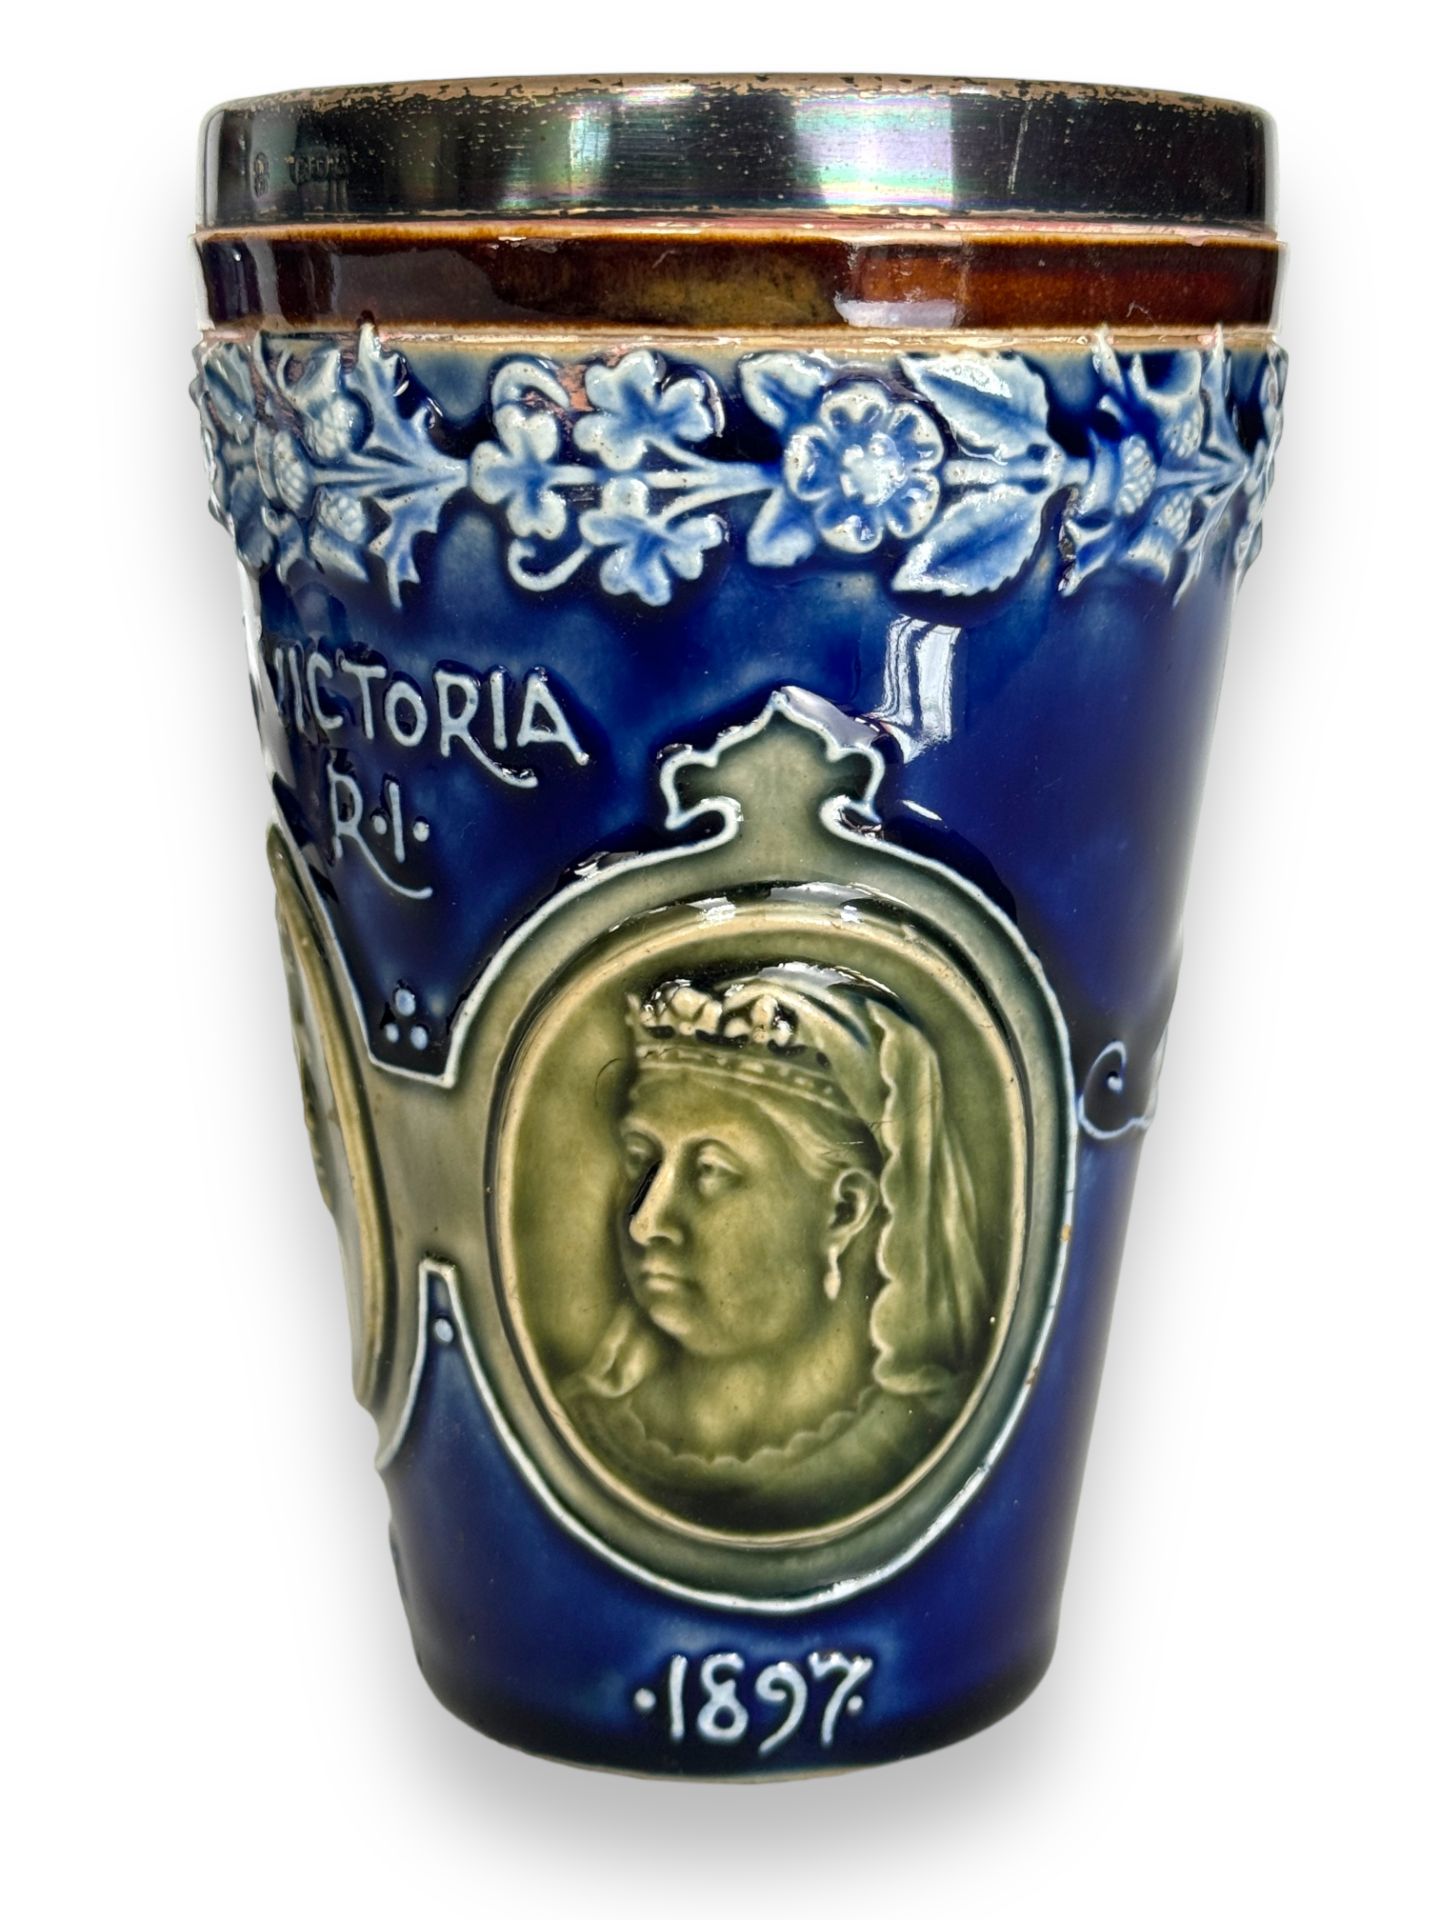 A Royal Doulton Queen Victoria diamond jubilee commemorative silver rimmed jug and a pair of matchin - Image 2 of 6